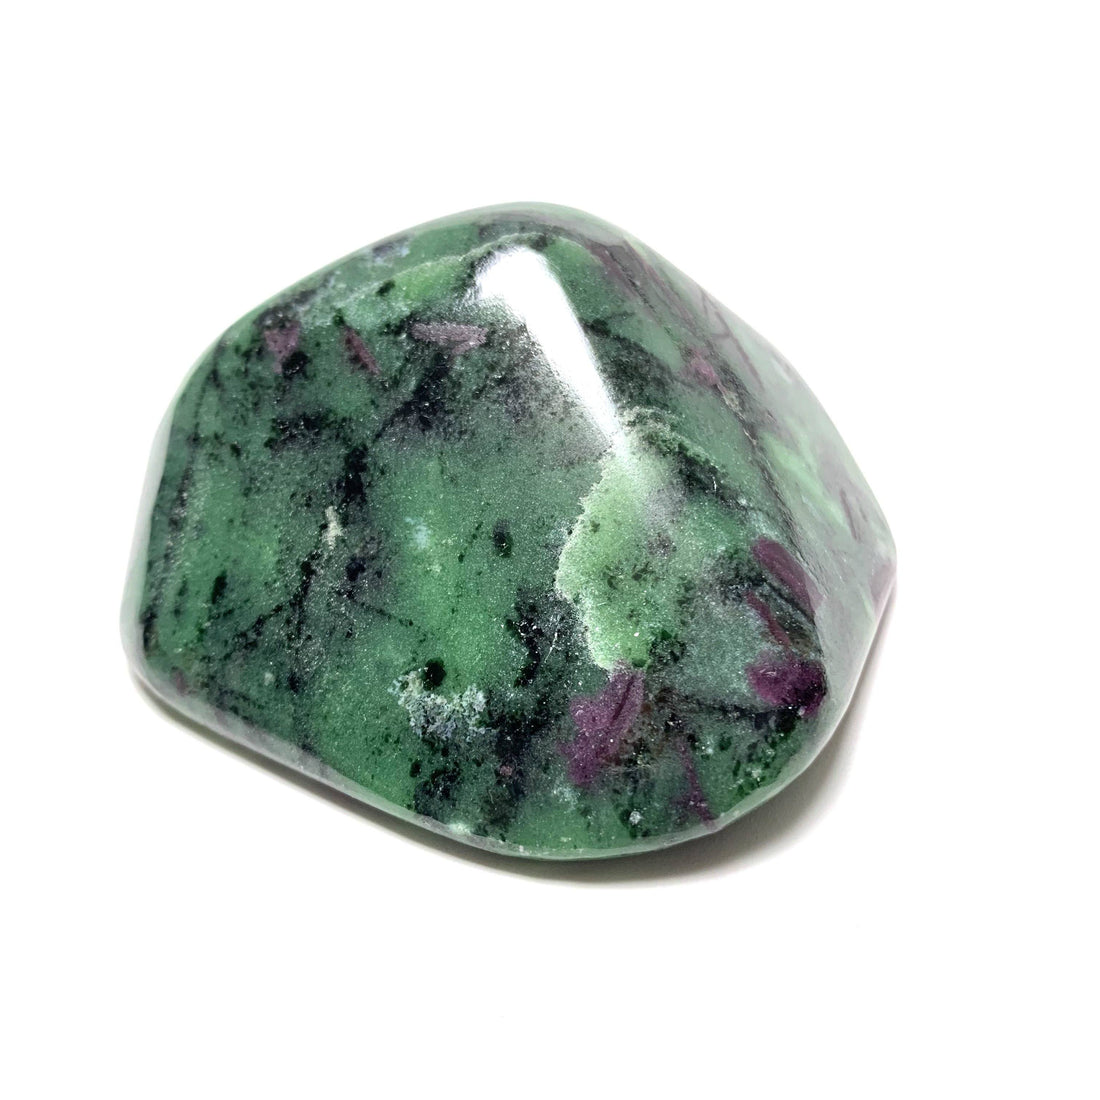 Ruby Zoisite Ruby Zoisite Crystals A. $4.00 